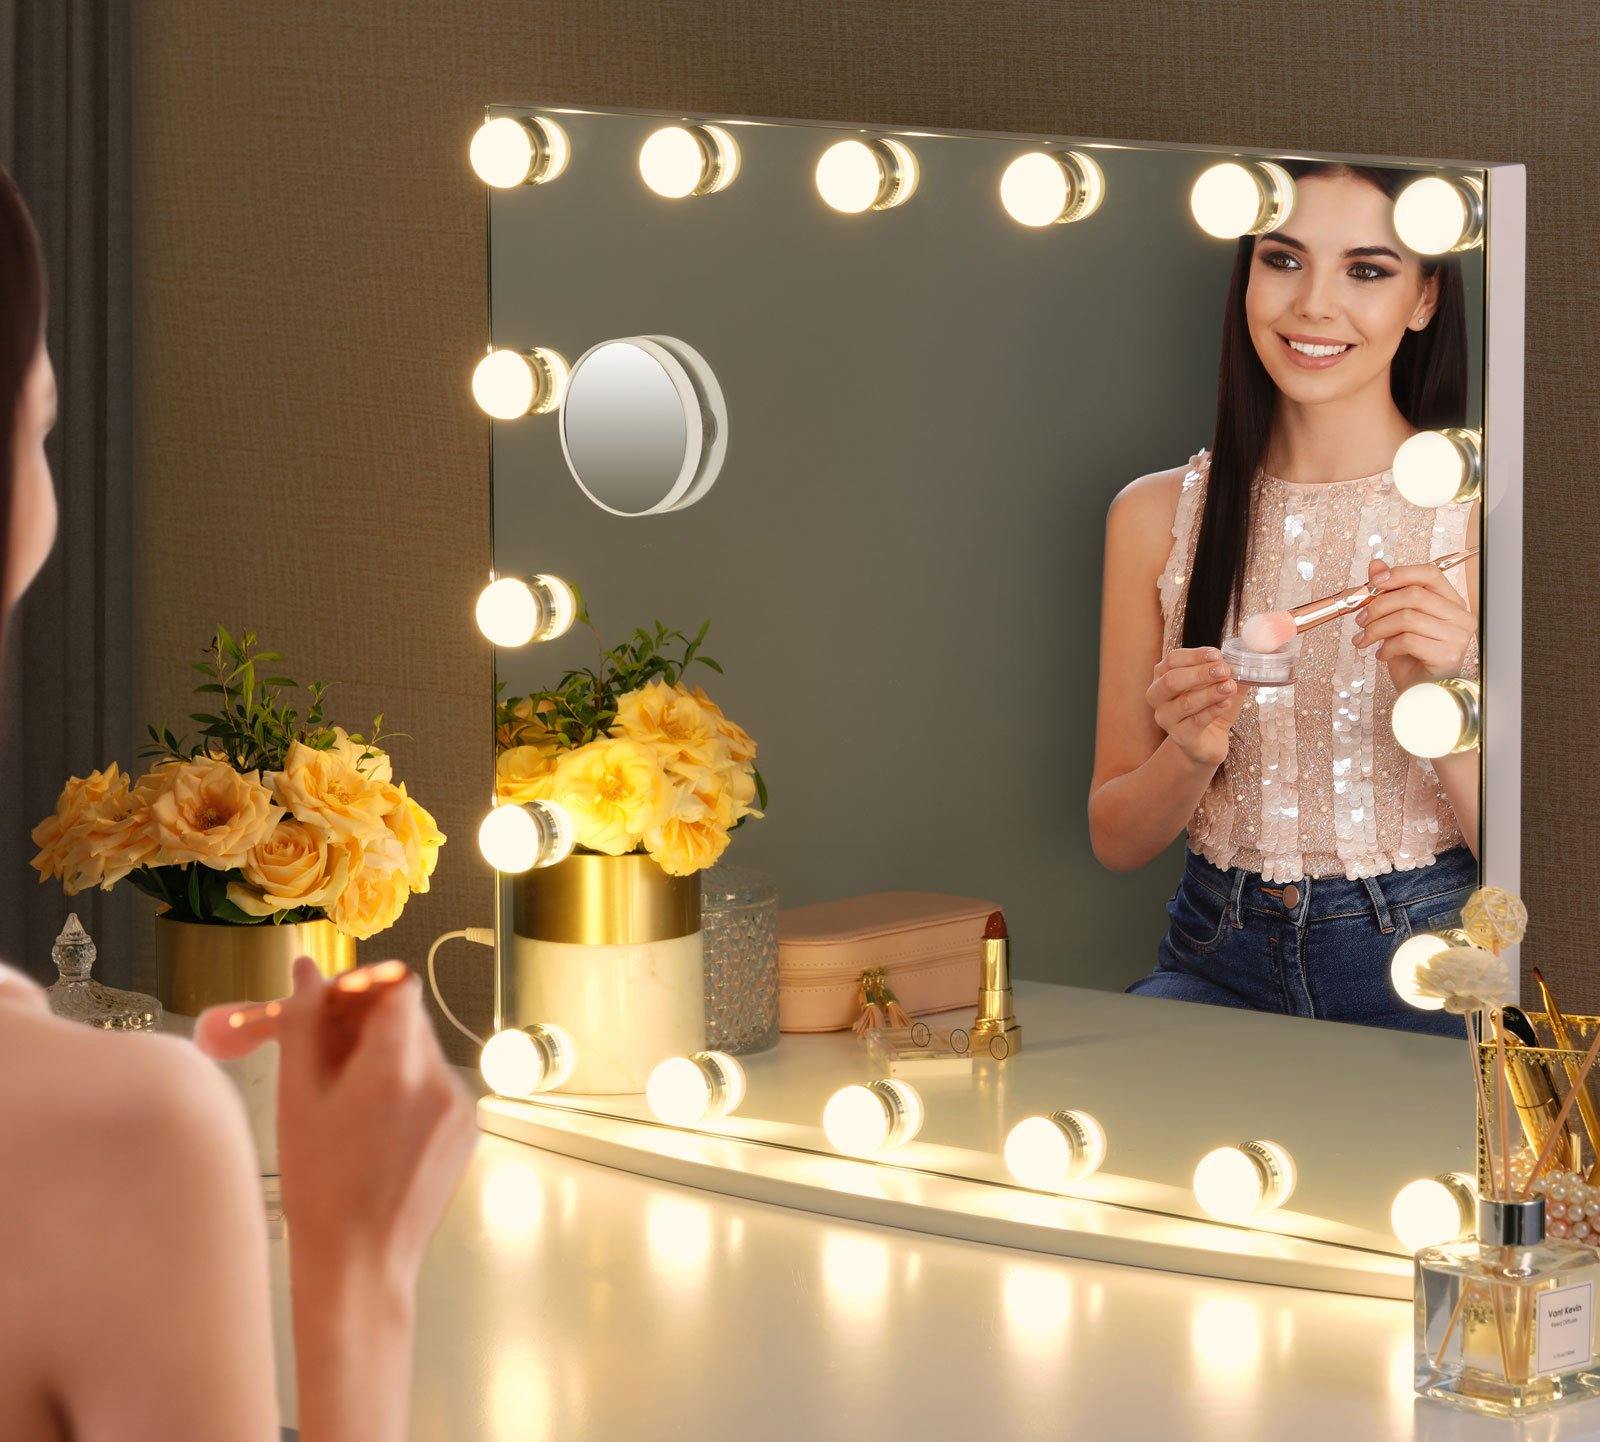 LUXFURNI Vanity Mirror with Makeup Lights, Large Hollywood Light Up Mirrors w/ 18 LED Bulbs for Bedroom Tabletop & Wall Mounted, White